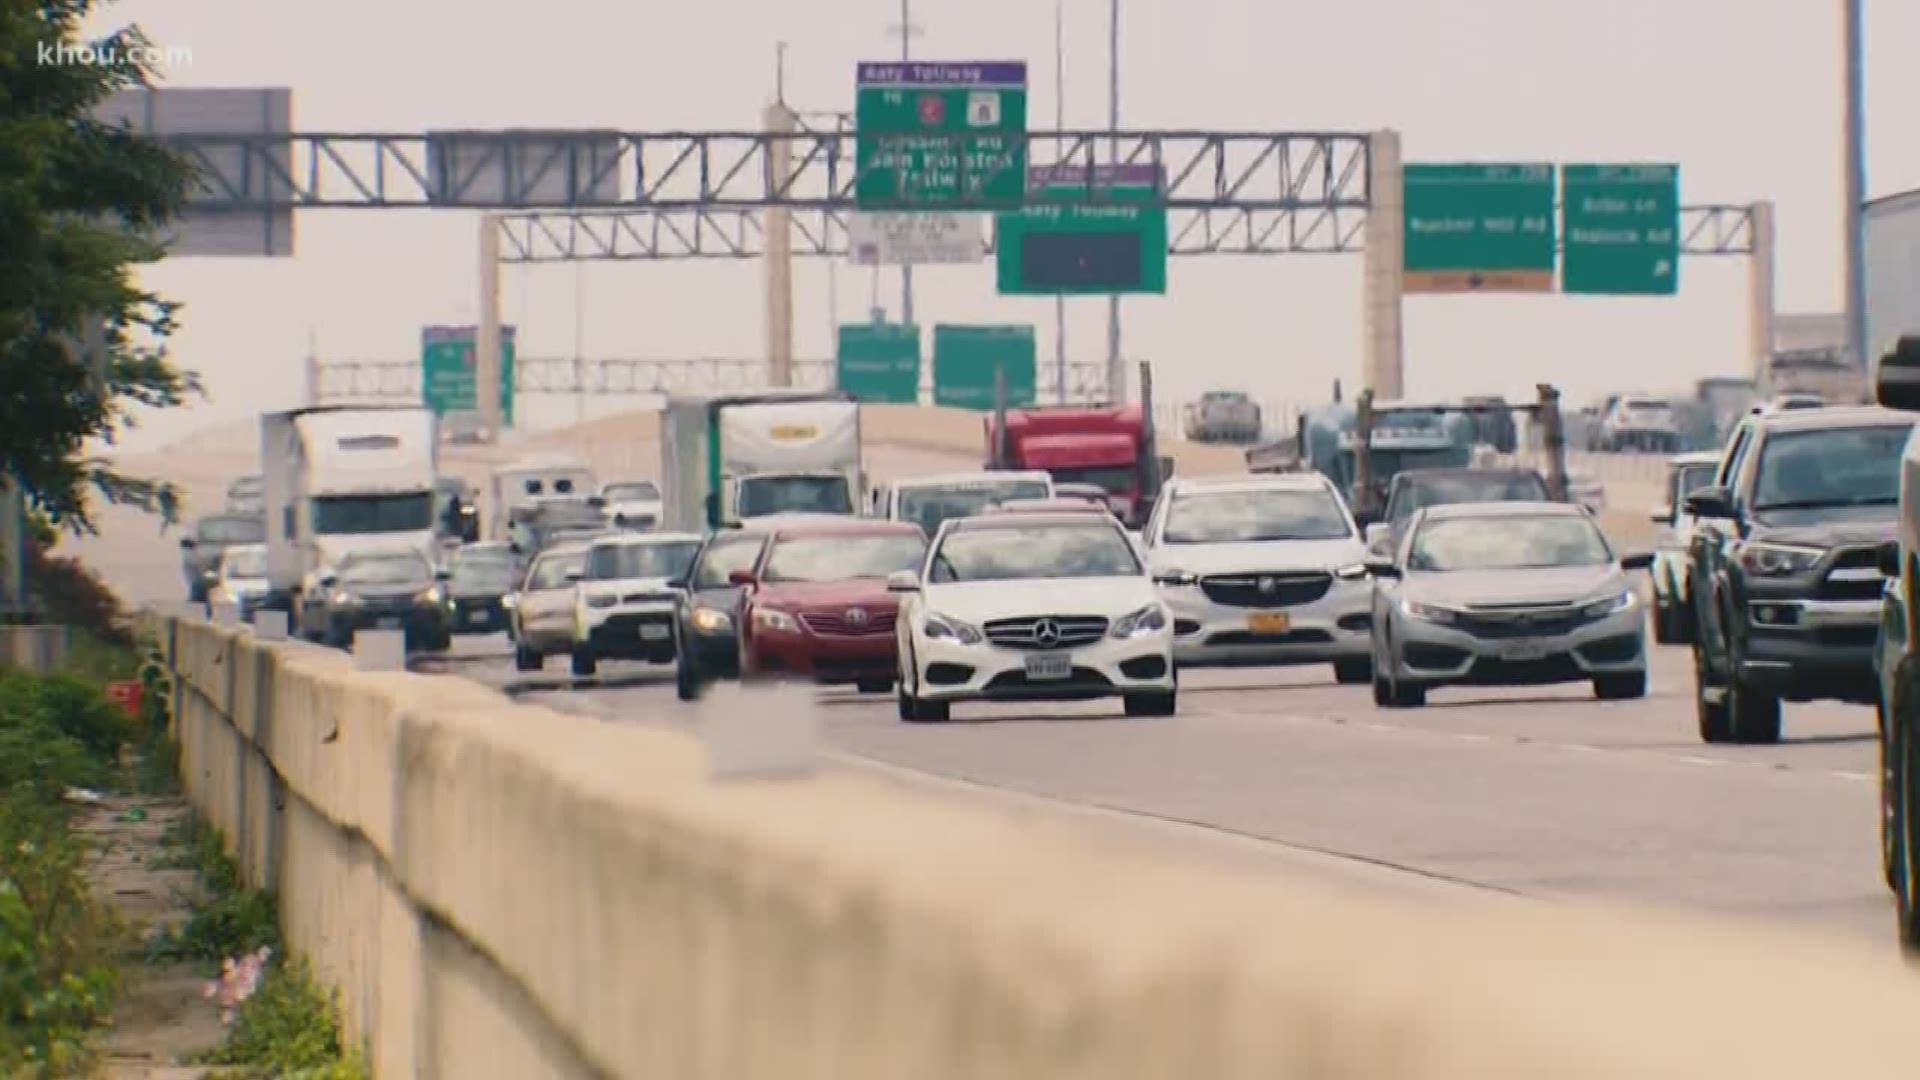 Harris County S Stay Home Order Limiting Traffic On Katy Freeway